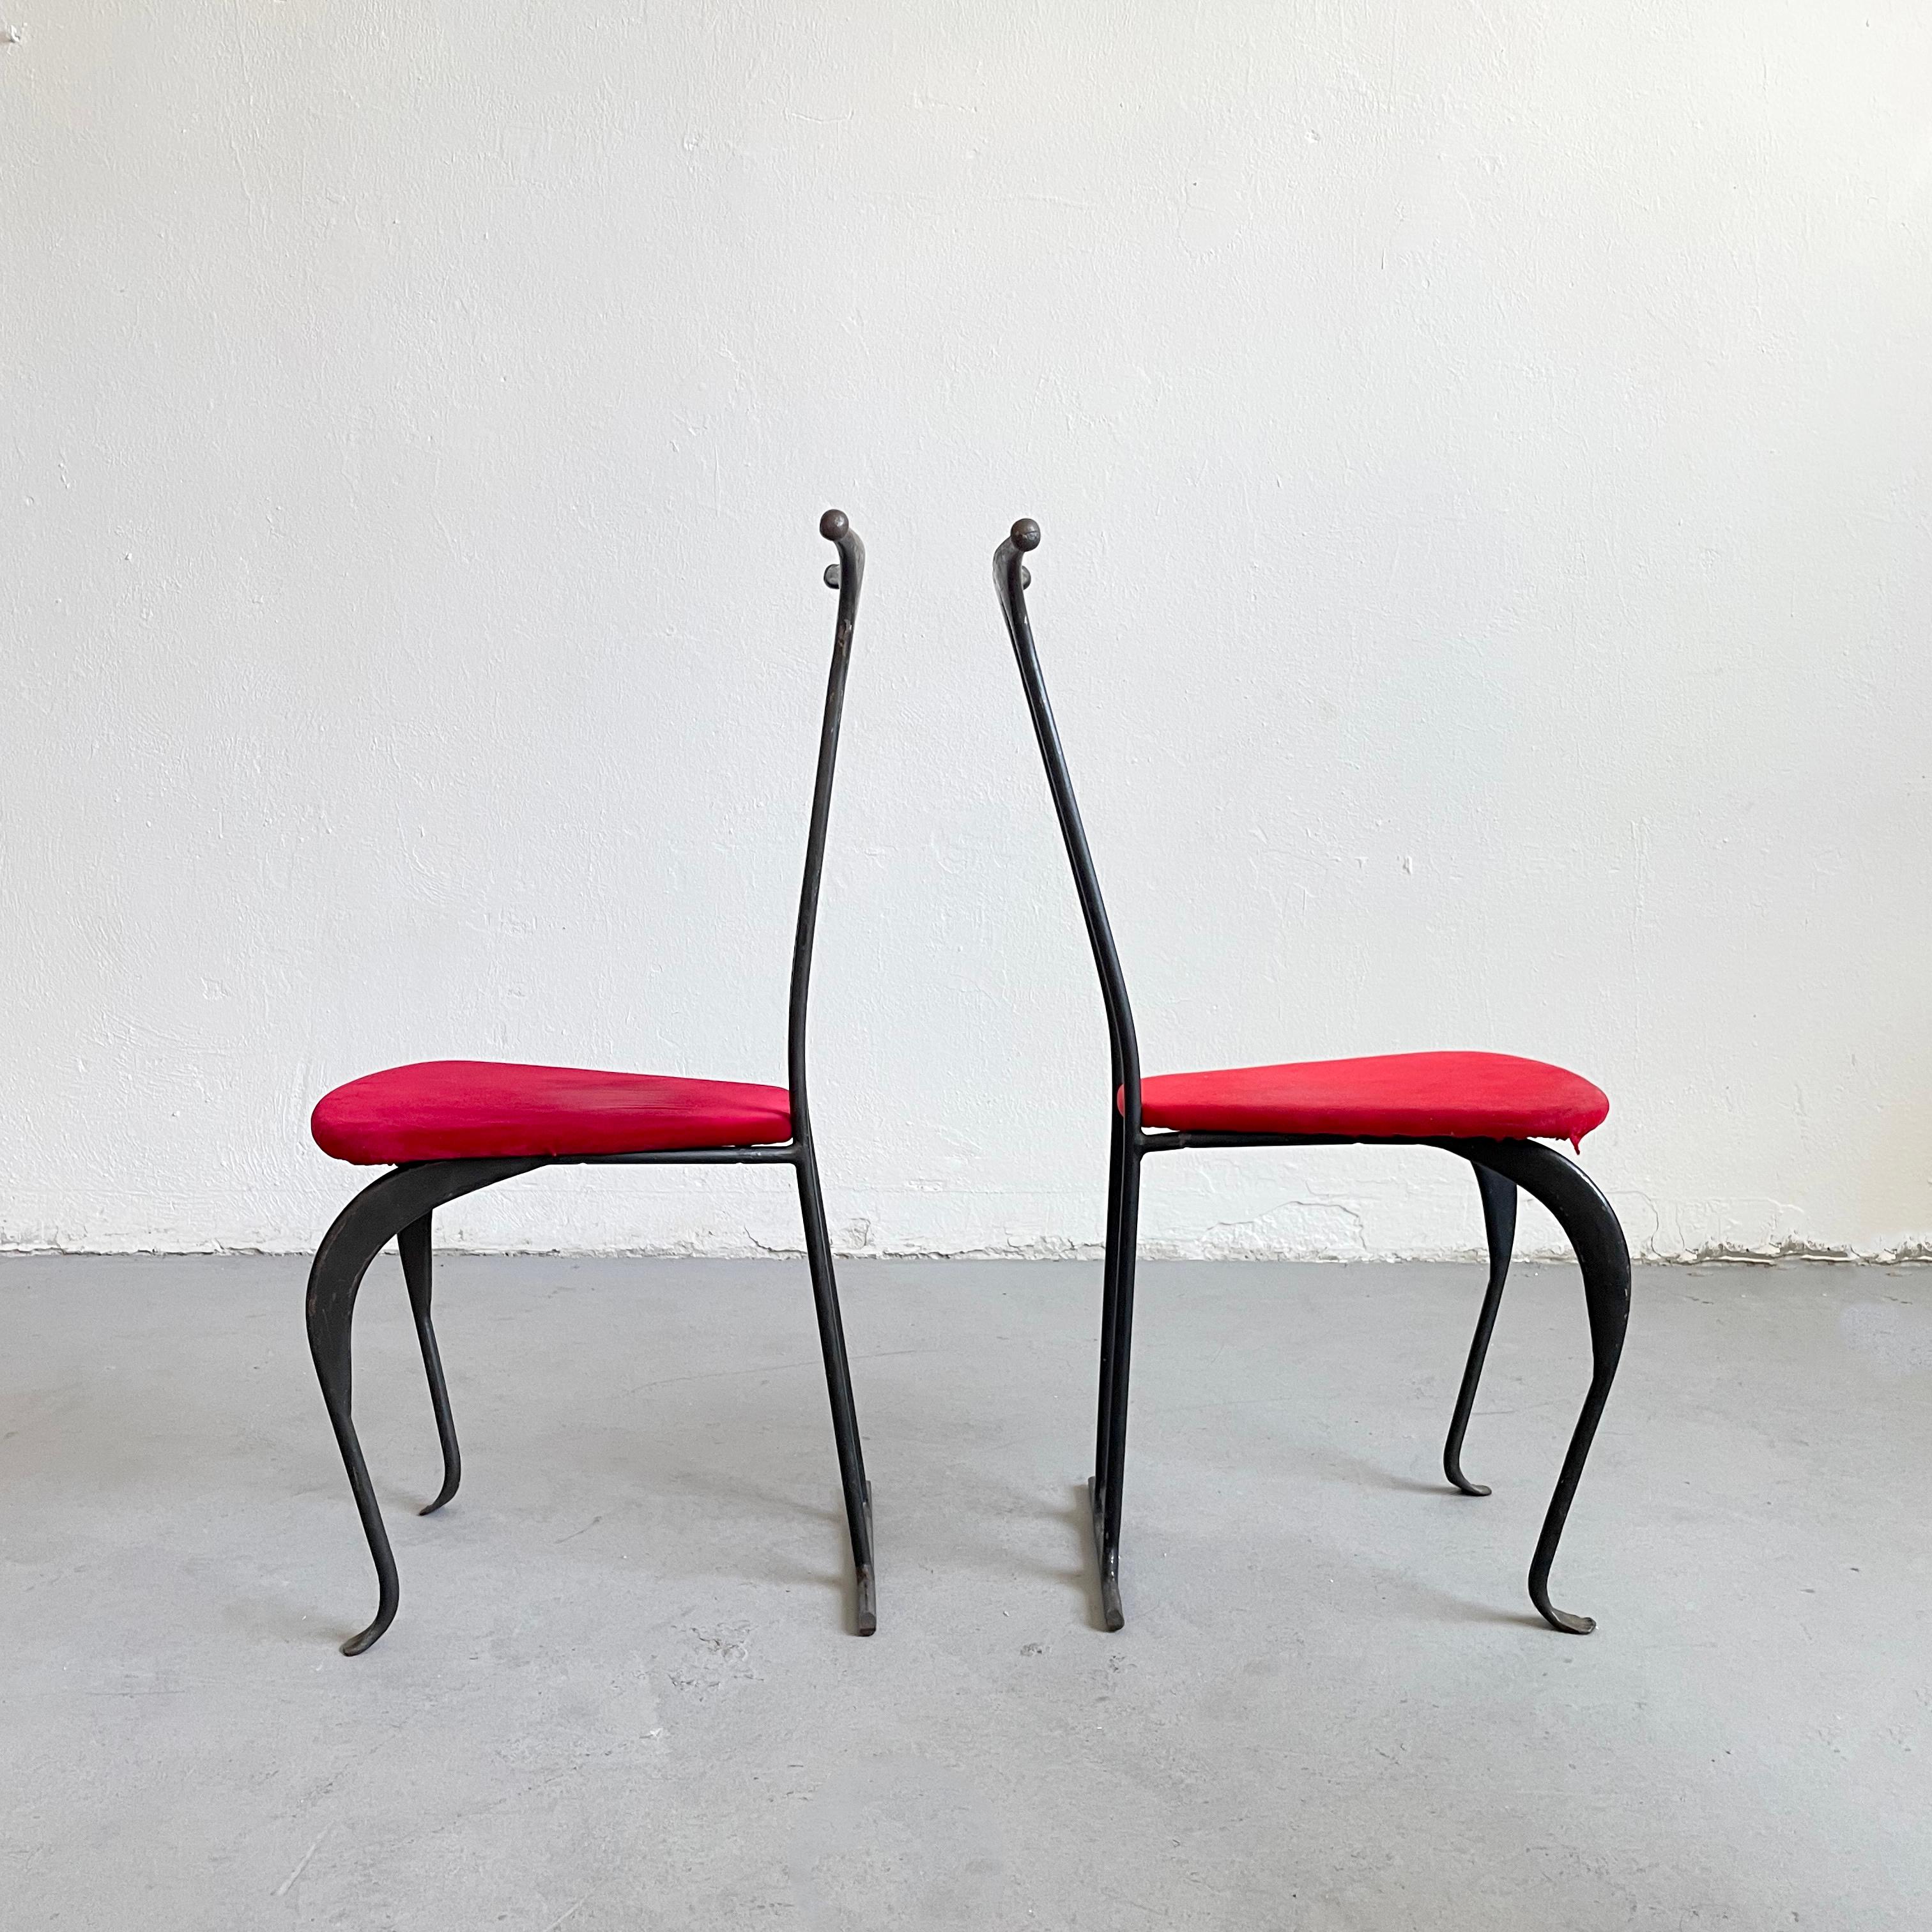 Pair of Postmodern Brutalist Artisanal Wrought Iron Chairs, Poland, 1980s 5